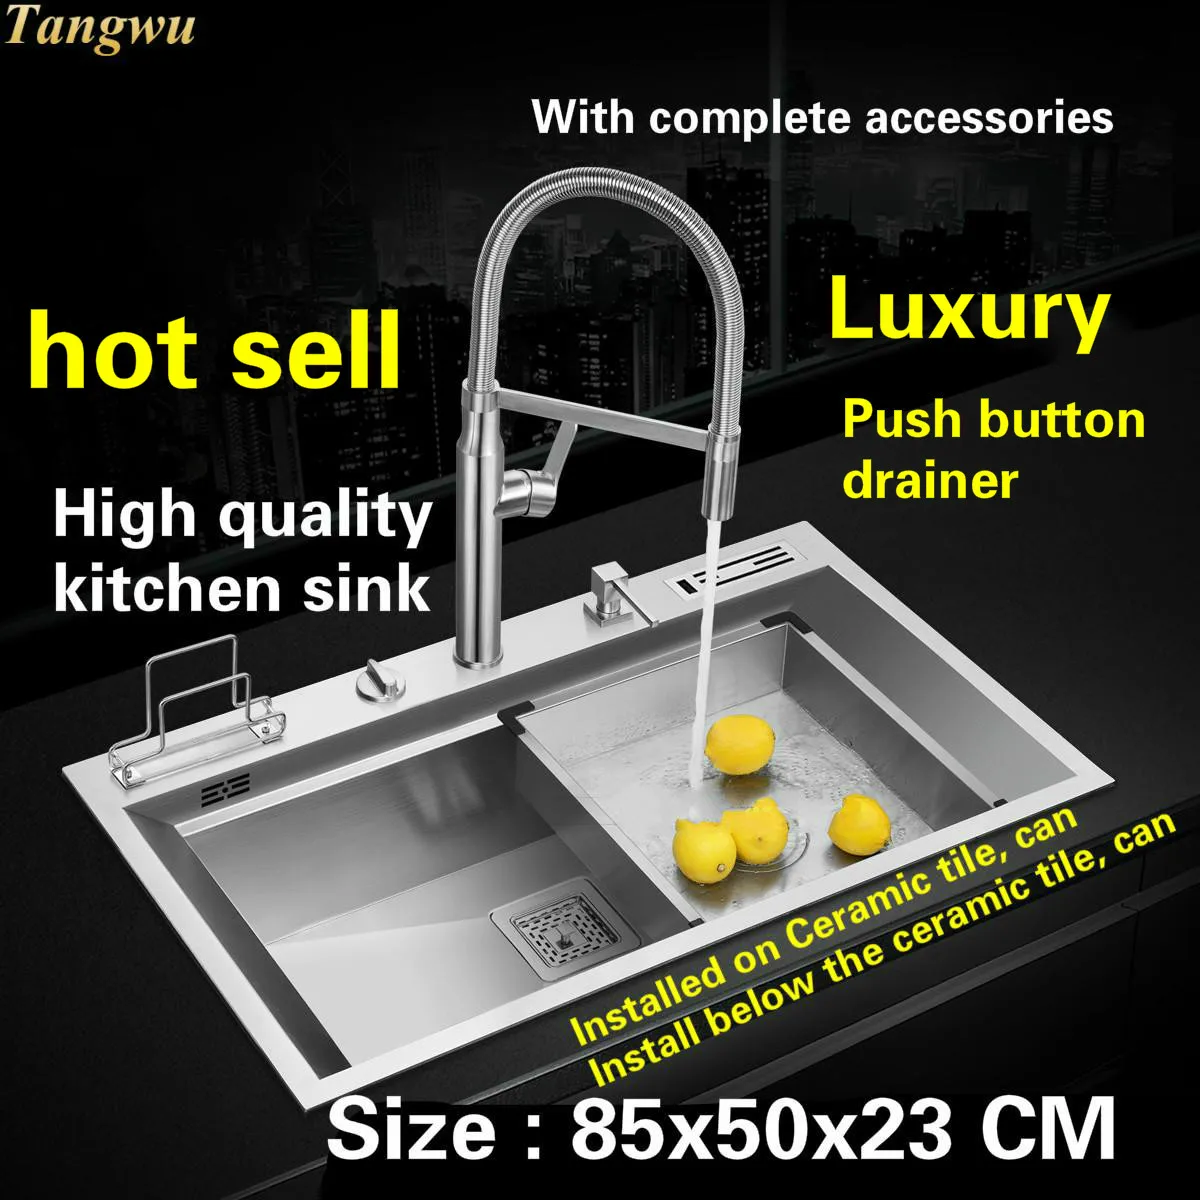 

Tangwu Apartment high quality kitchen sink 304 stainless steel mesa control the drainage manual single slot 850x500x230 mm